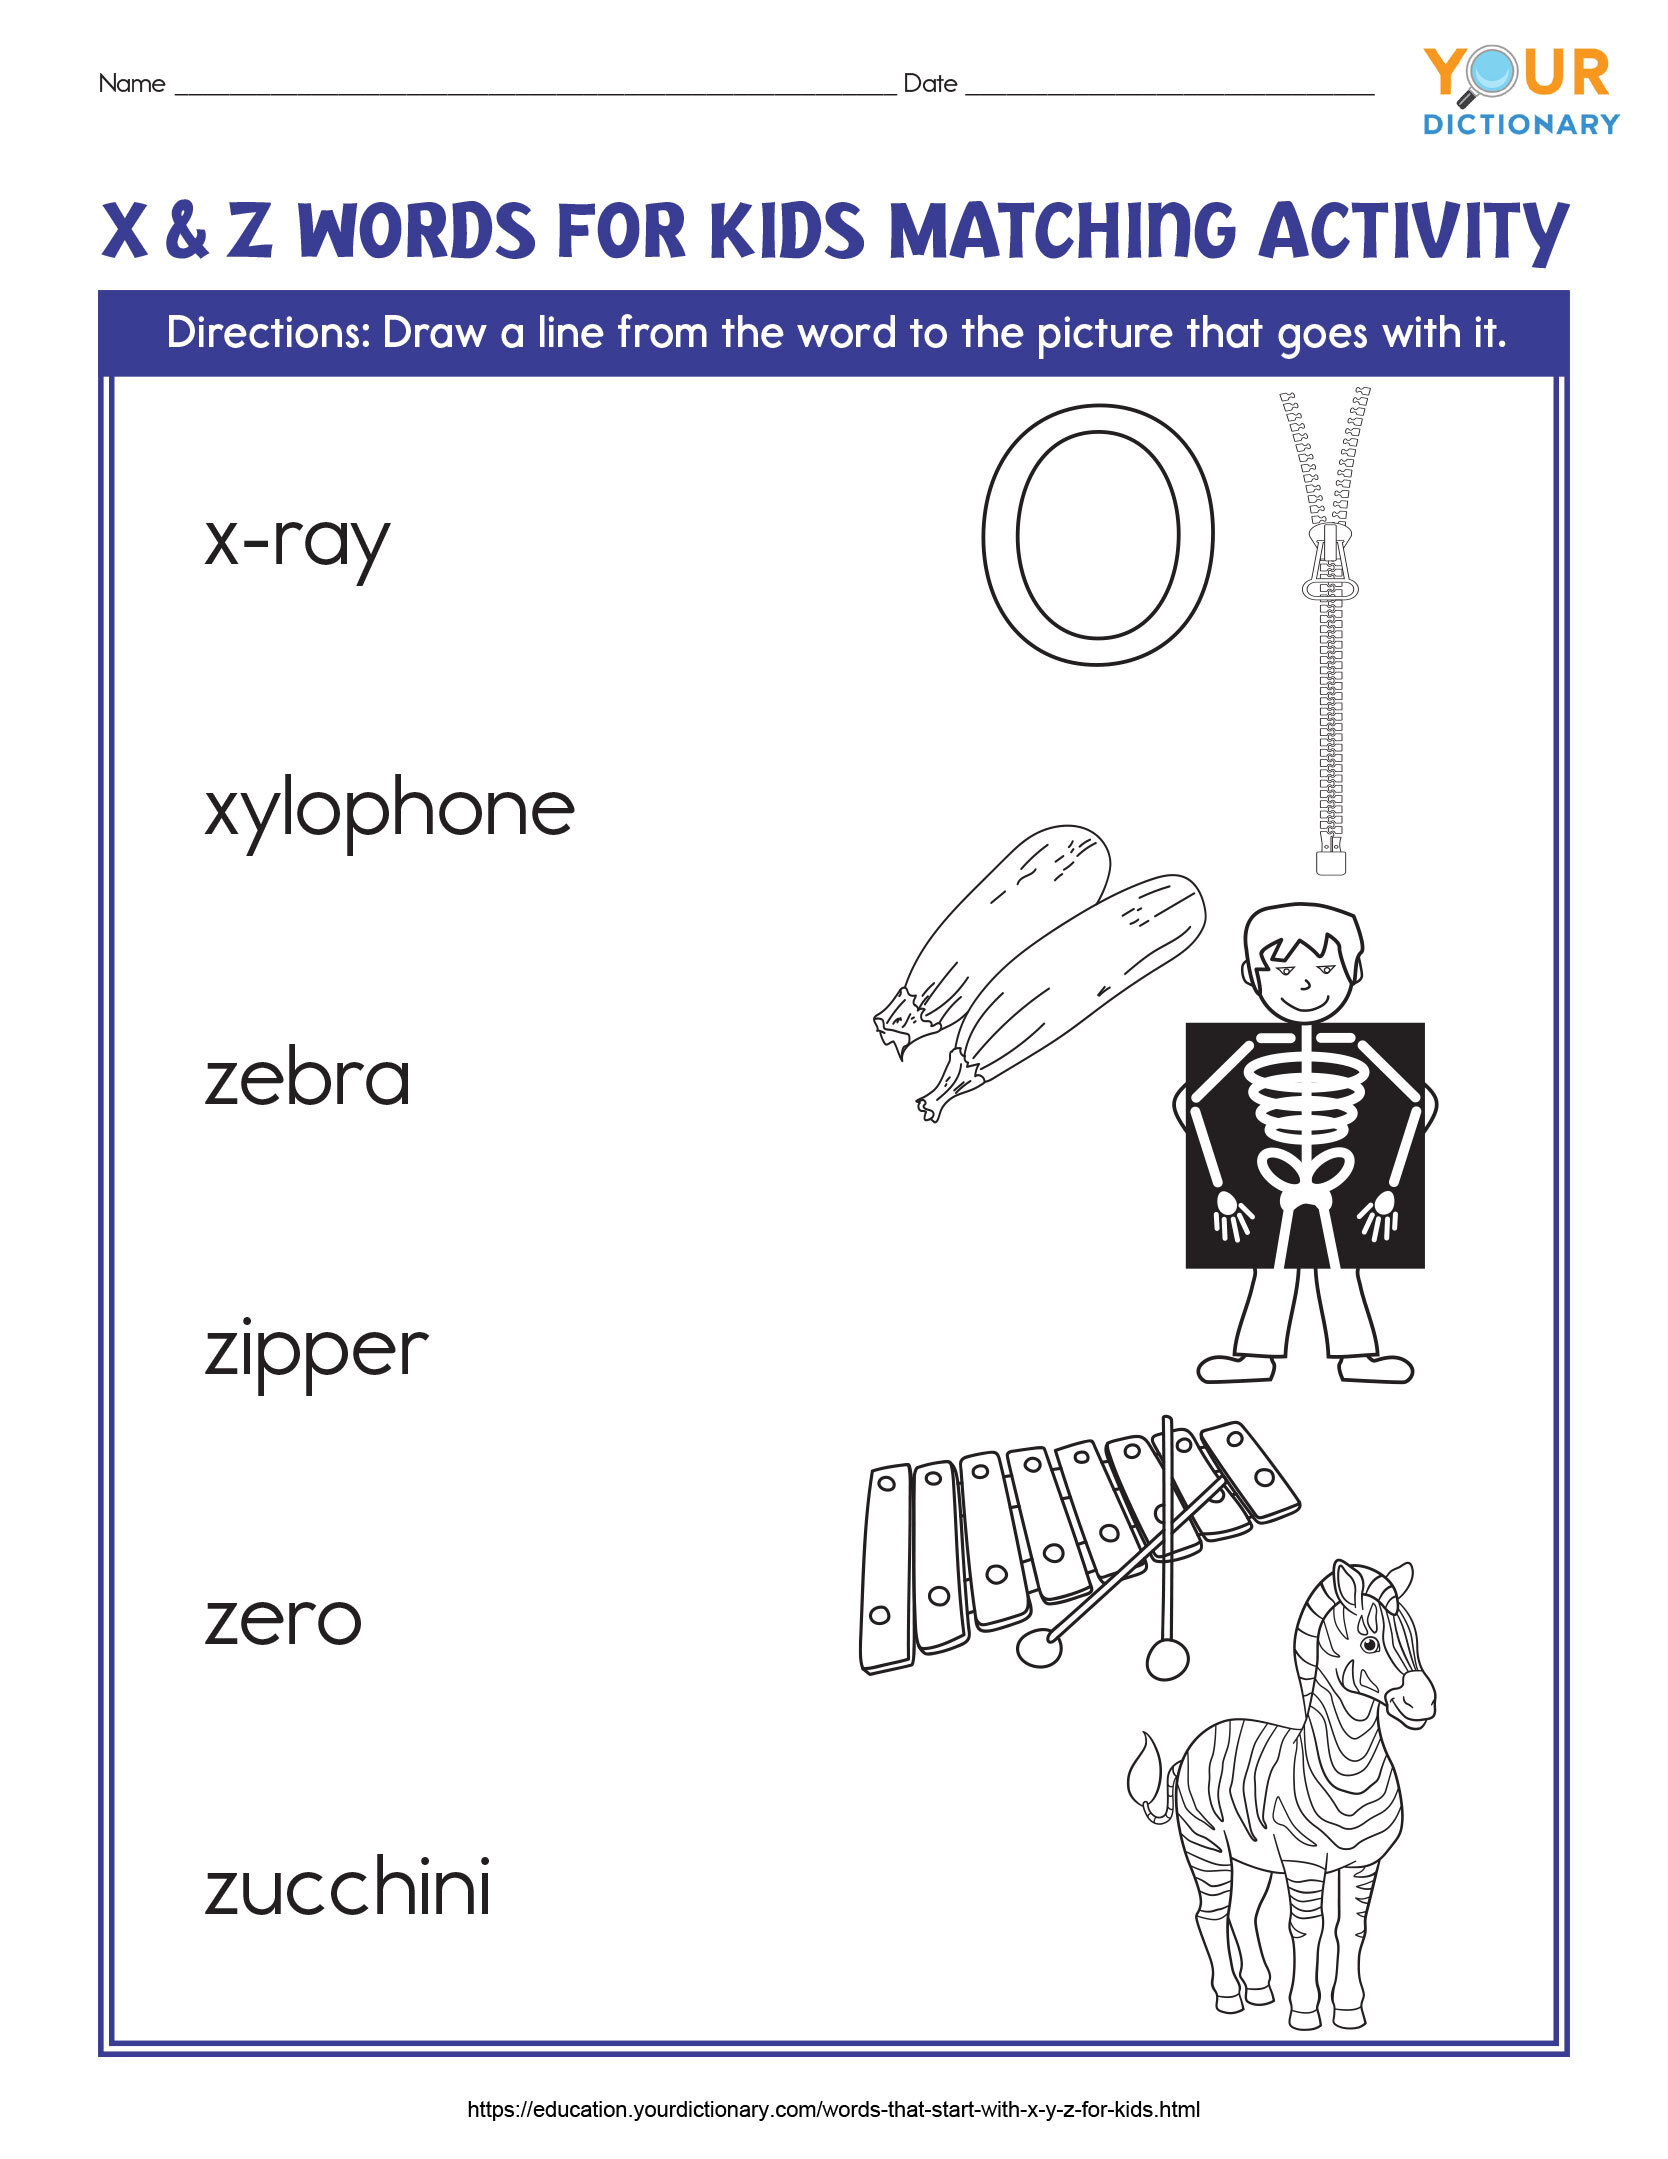 xyz words for kids matching activity